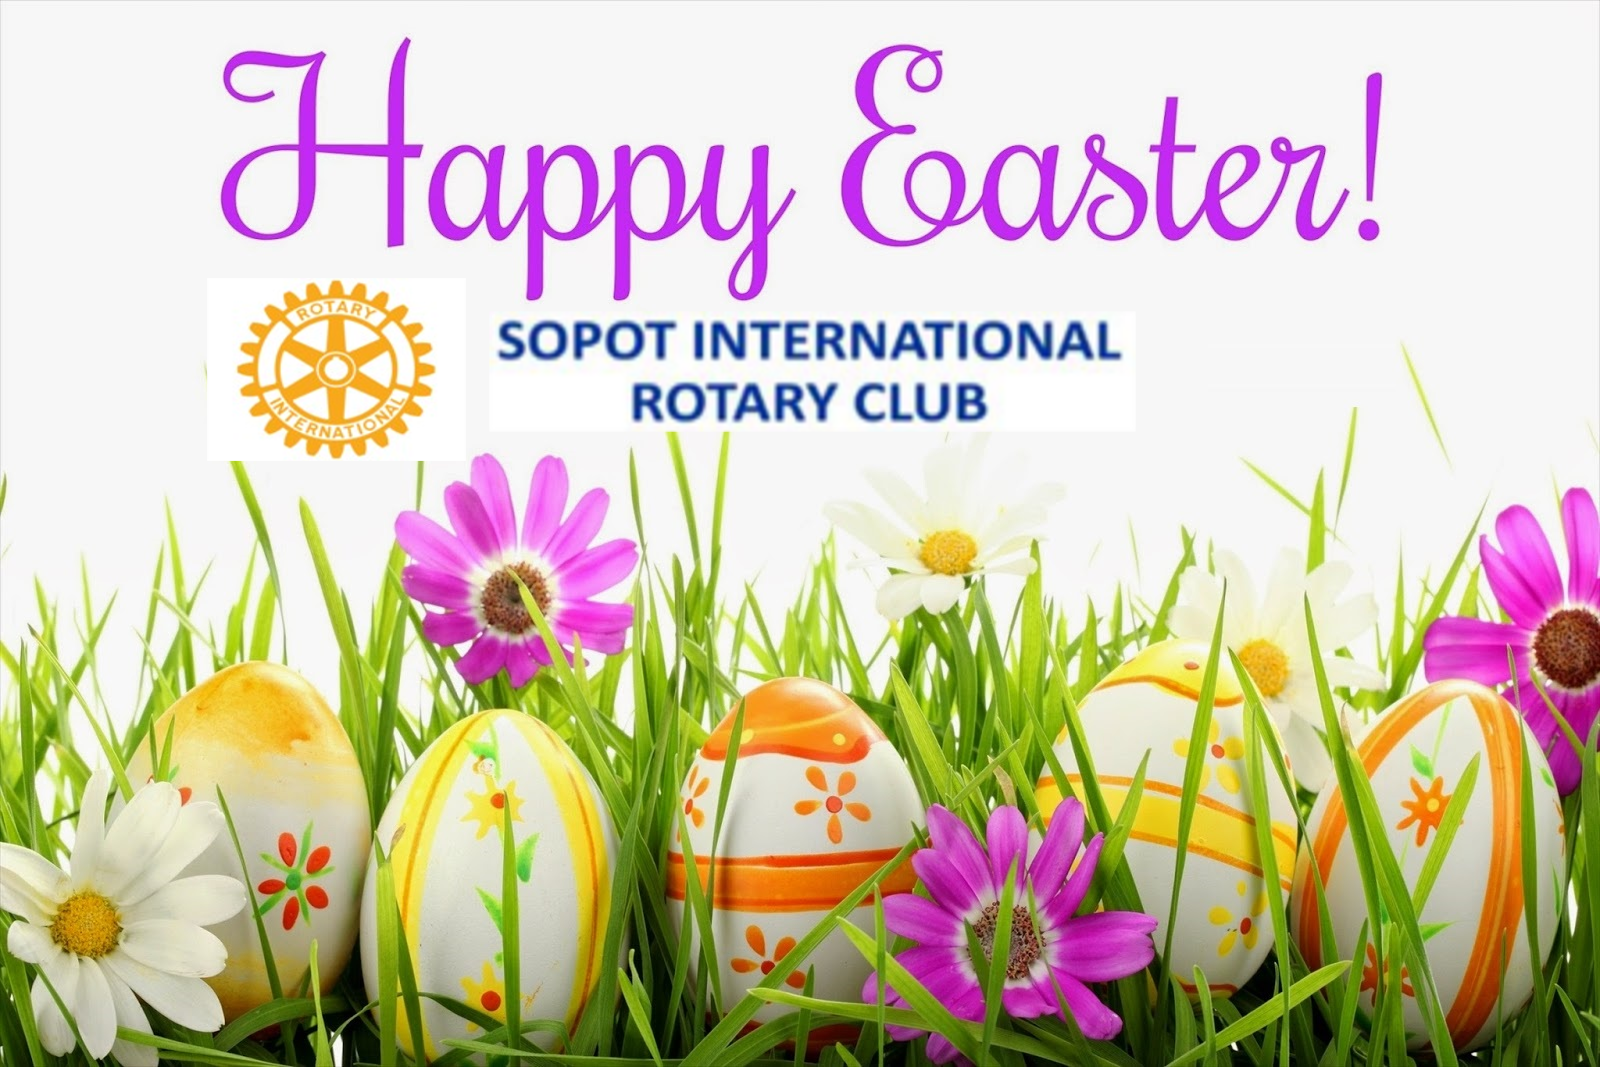 Our wishes for your this Easter. Good health, Good fortune, And Fulfilling life. Happy Easter!